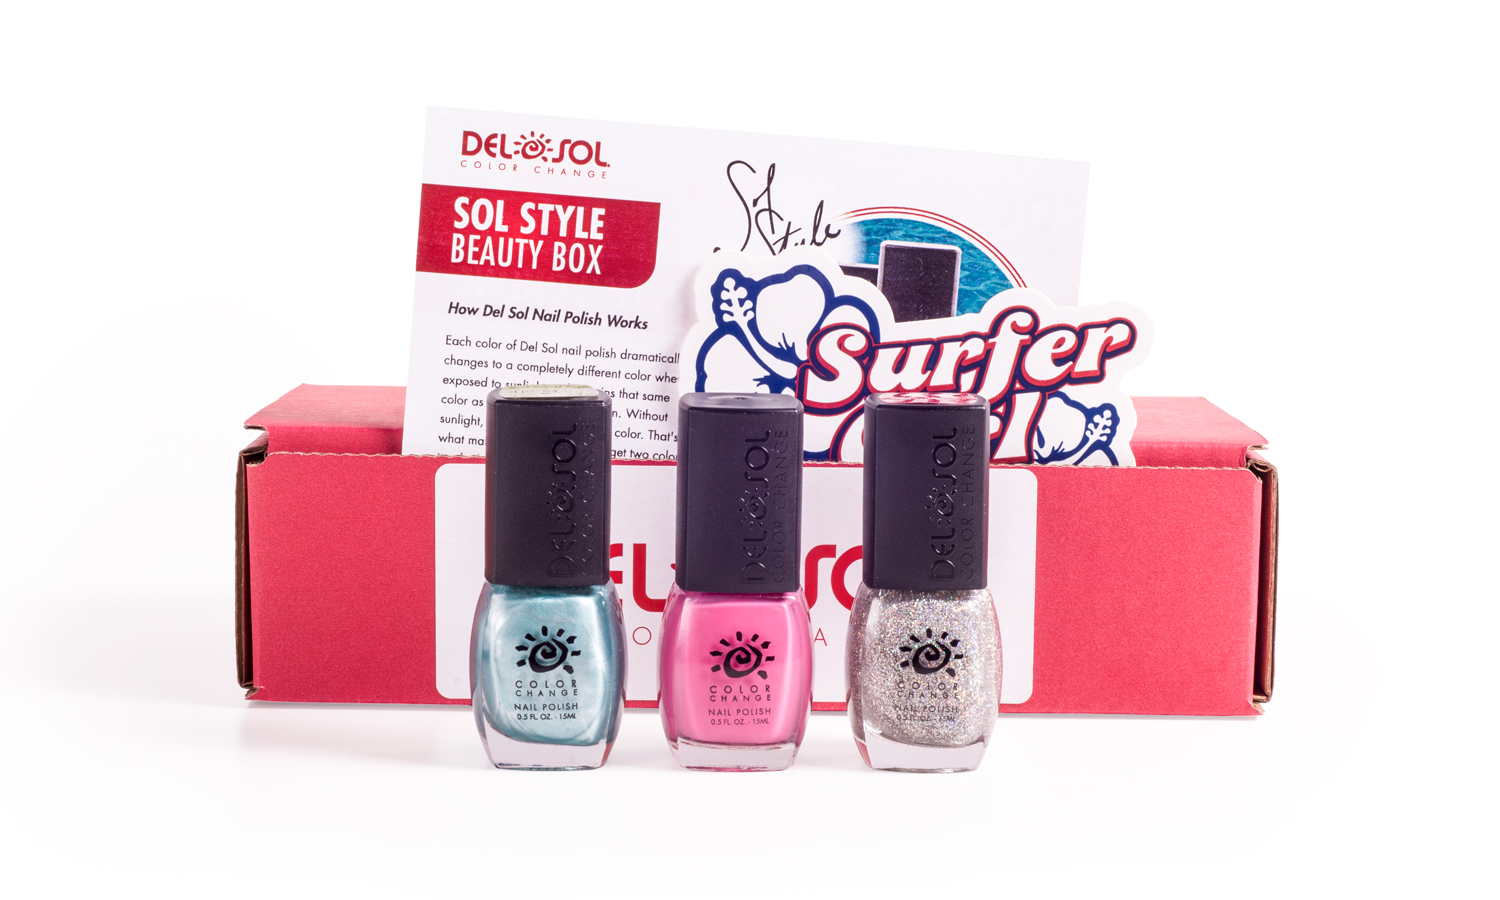 Beauty Box Subscription allows Del Sol Nail Color-Changing Polish to arrive at your doorstep every month.